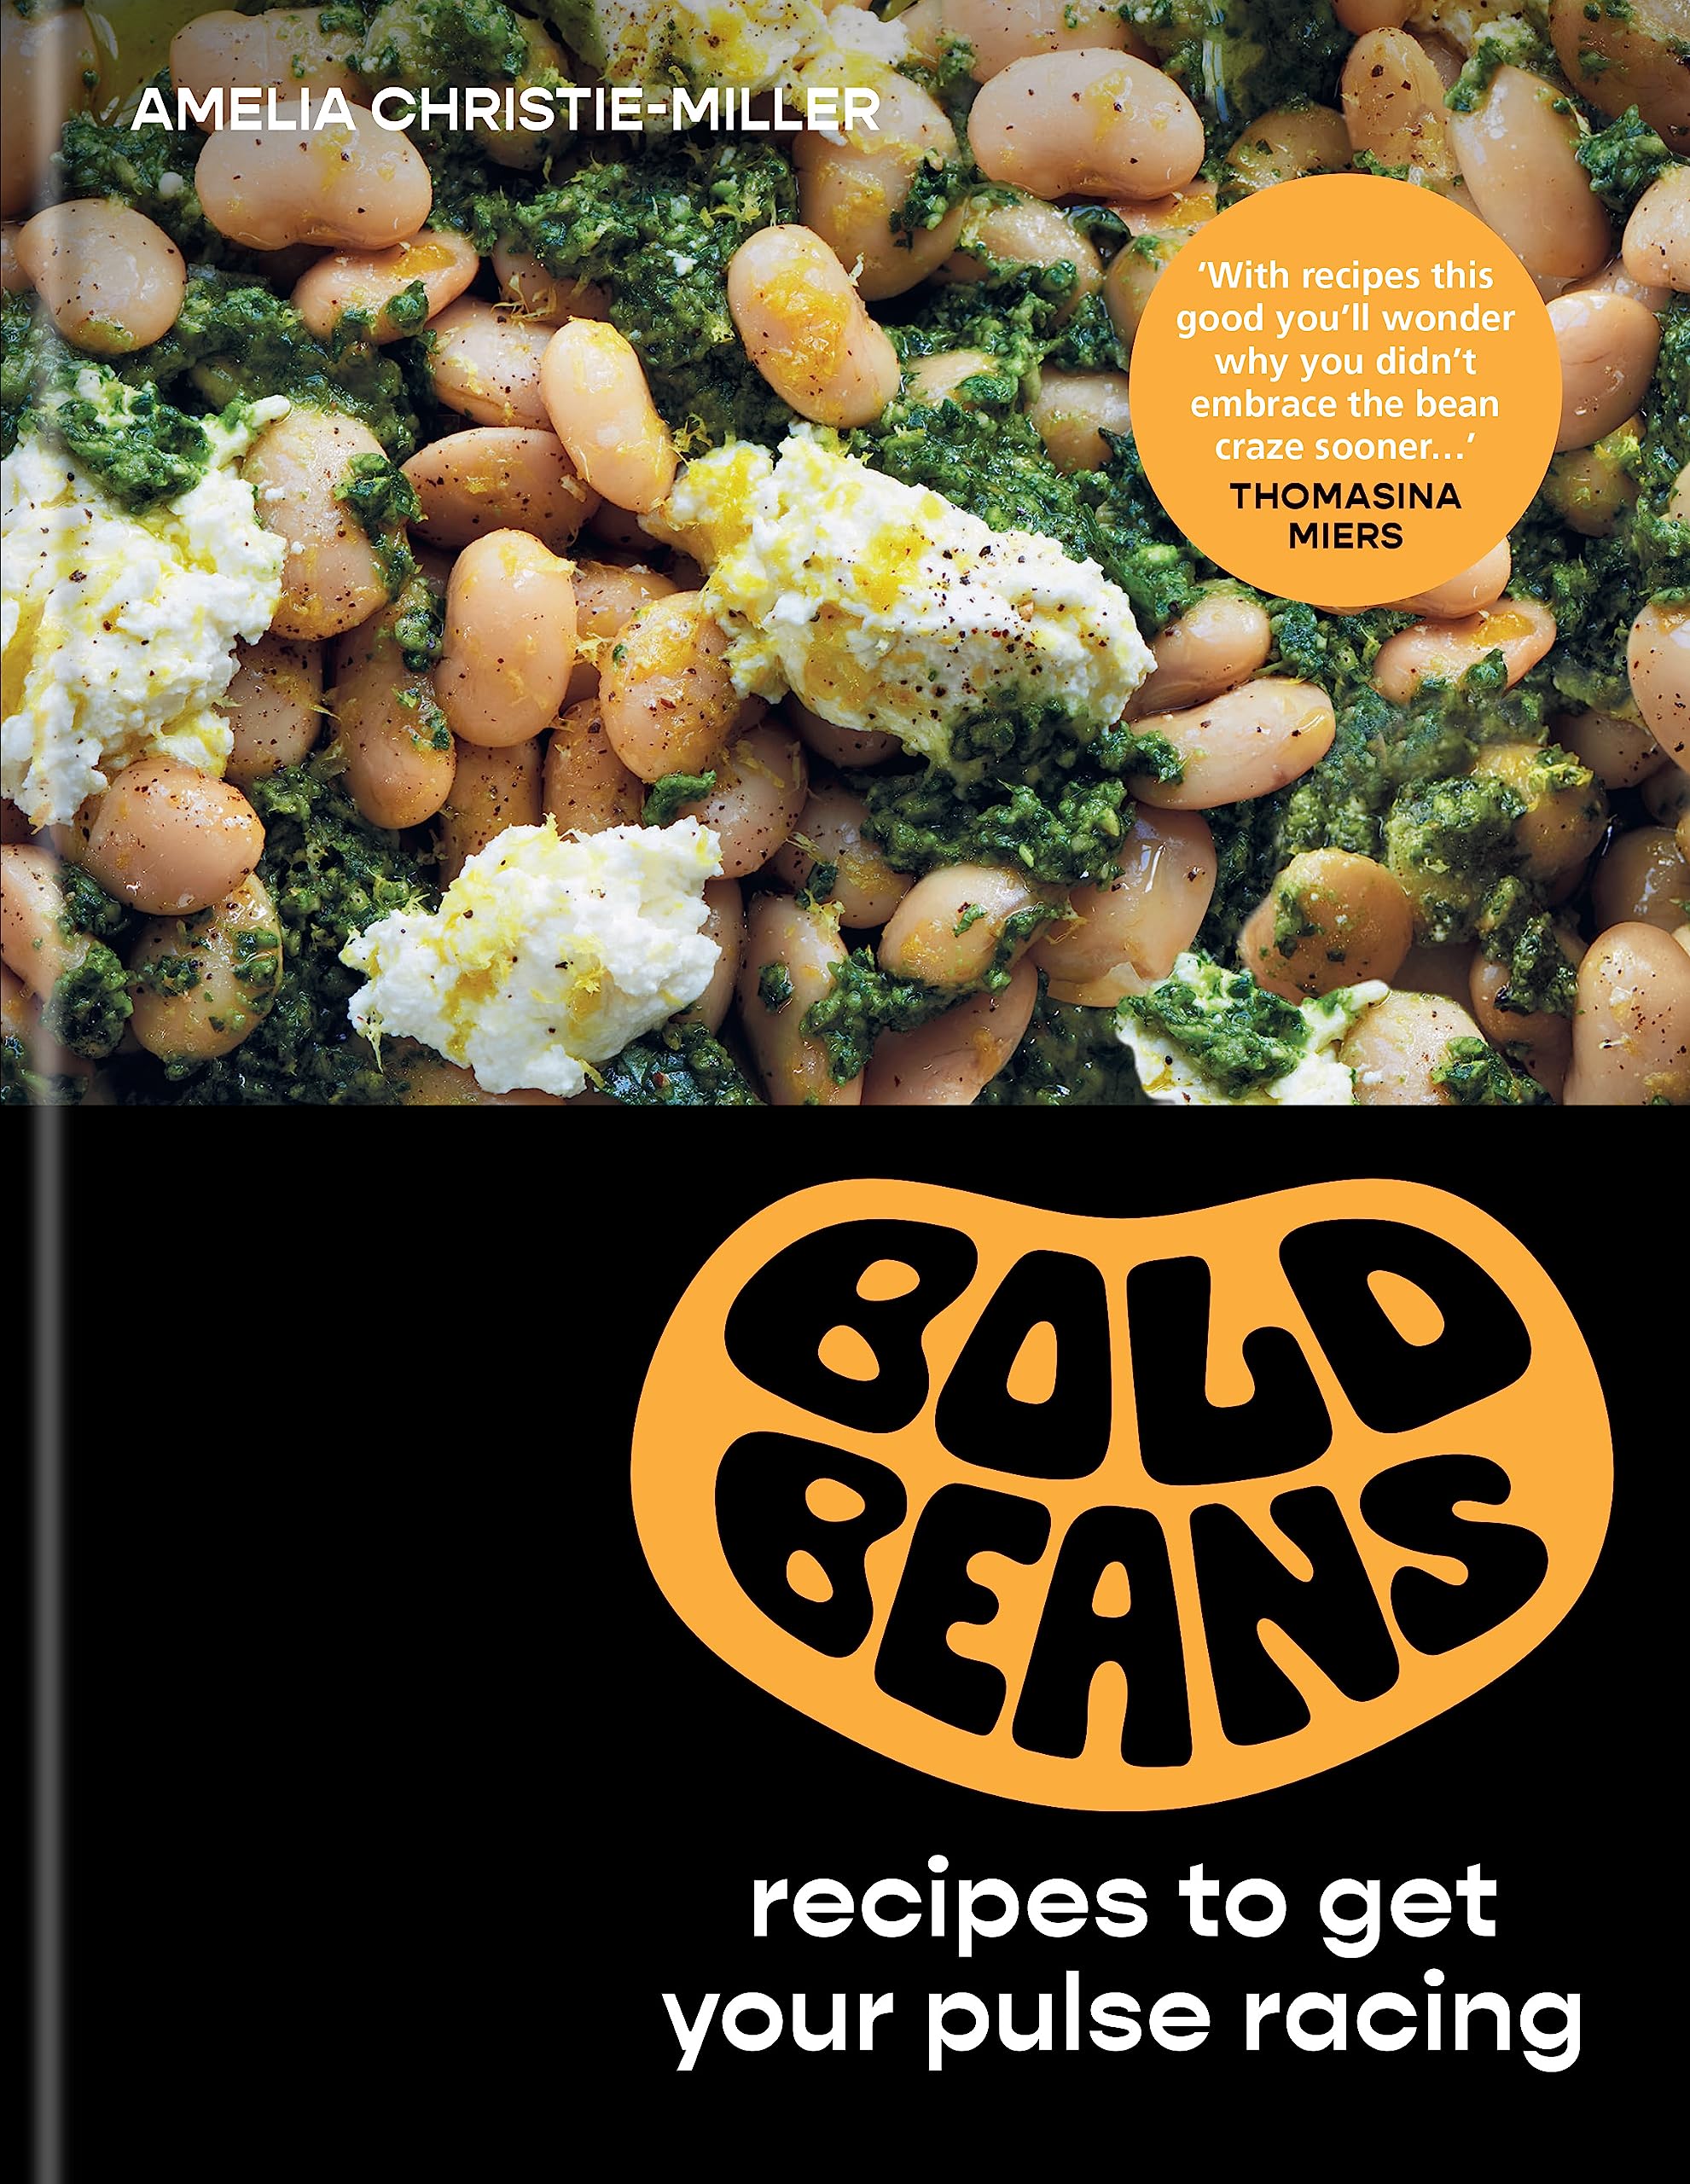 Bold Beans: beautiful, brilliant and exciting recipes (Amelia Christie-Miller)